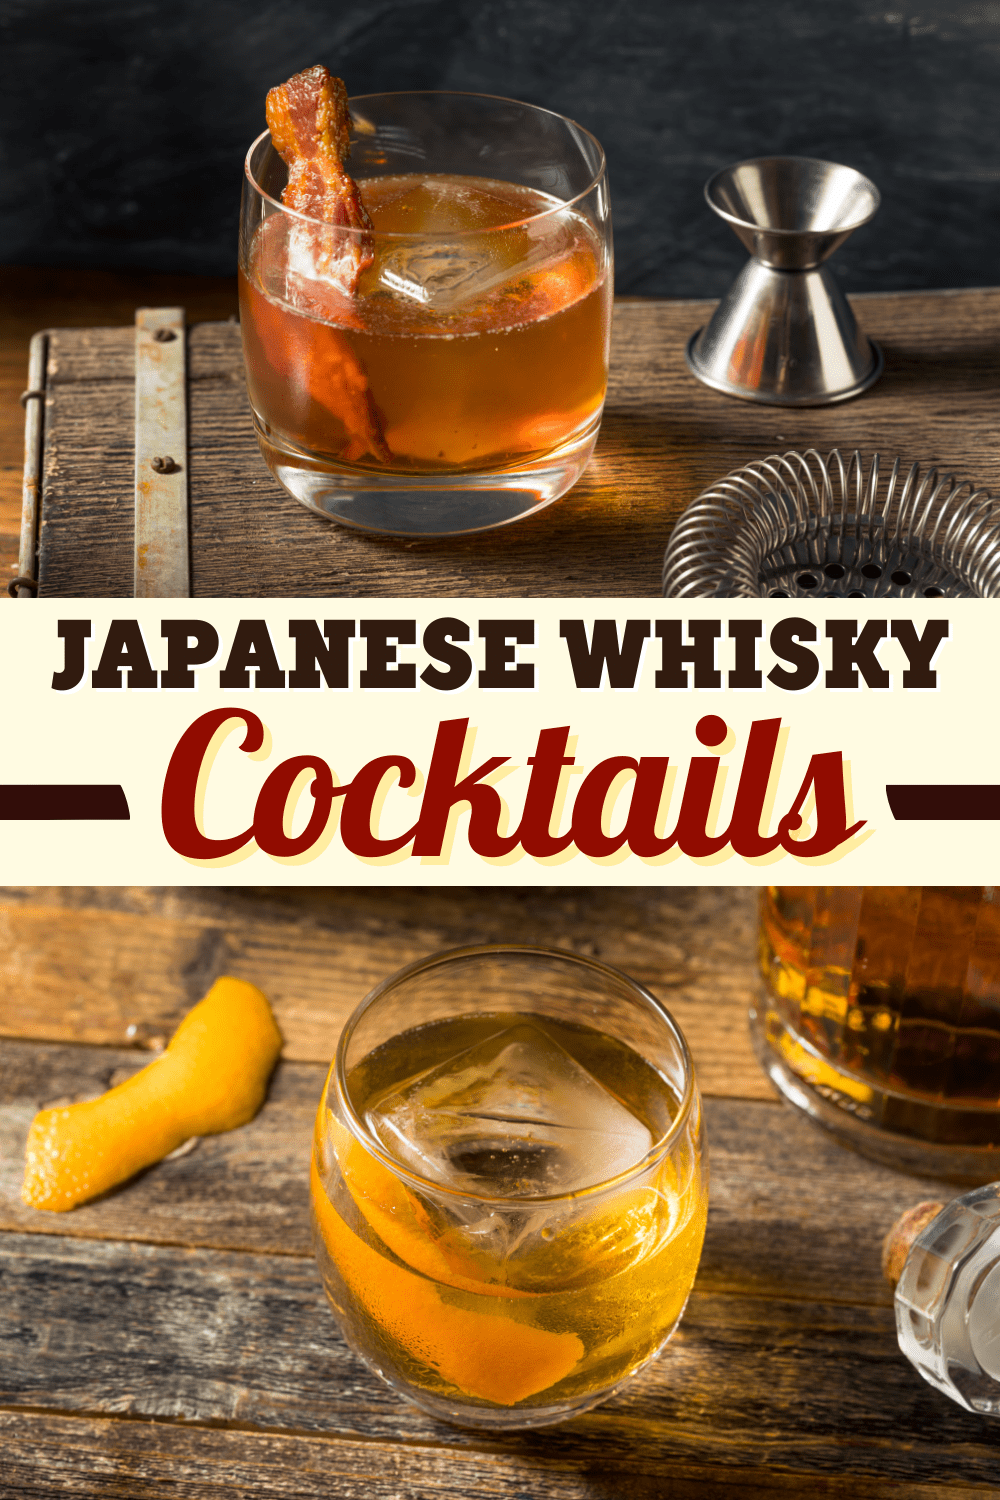 Japanese Whisky Cocktails